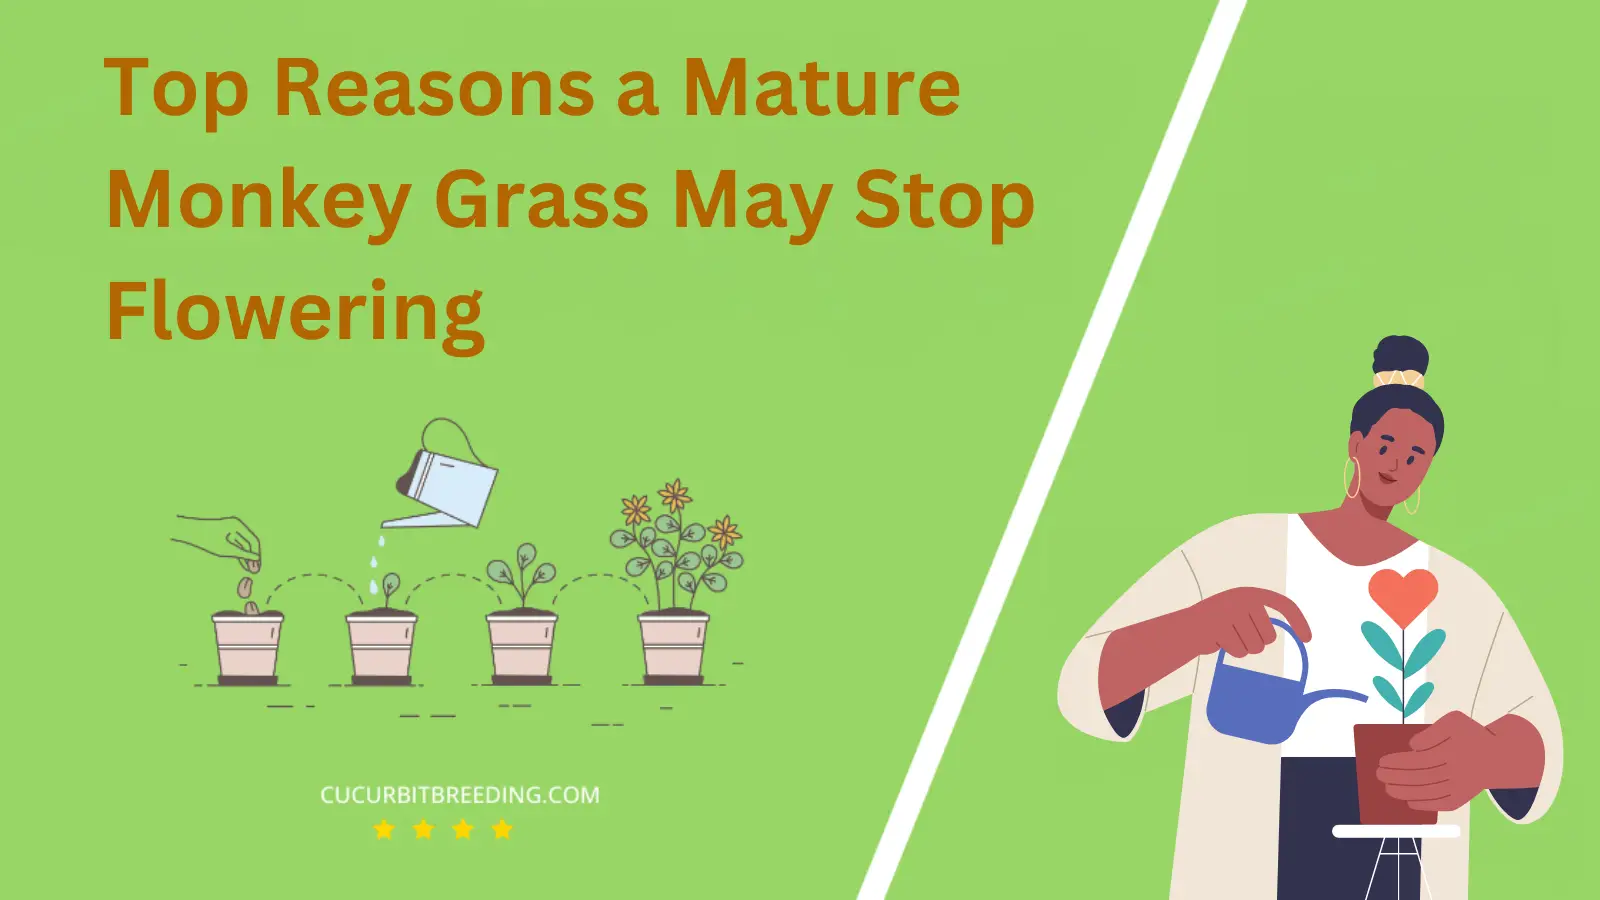 Top Reasons a Mature Monkey Grass May Stop Flowering